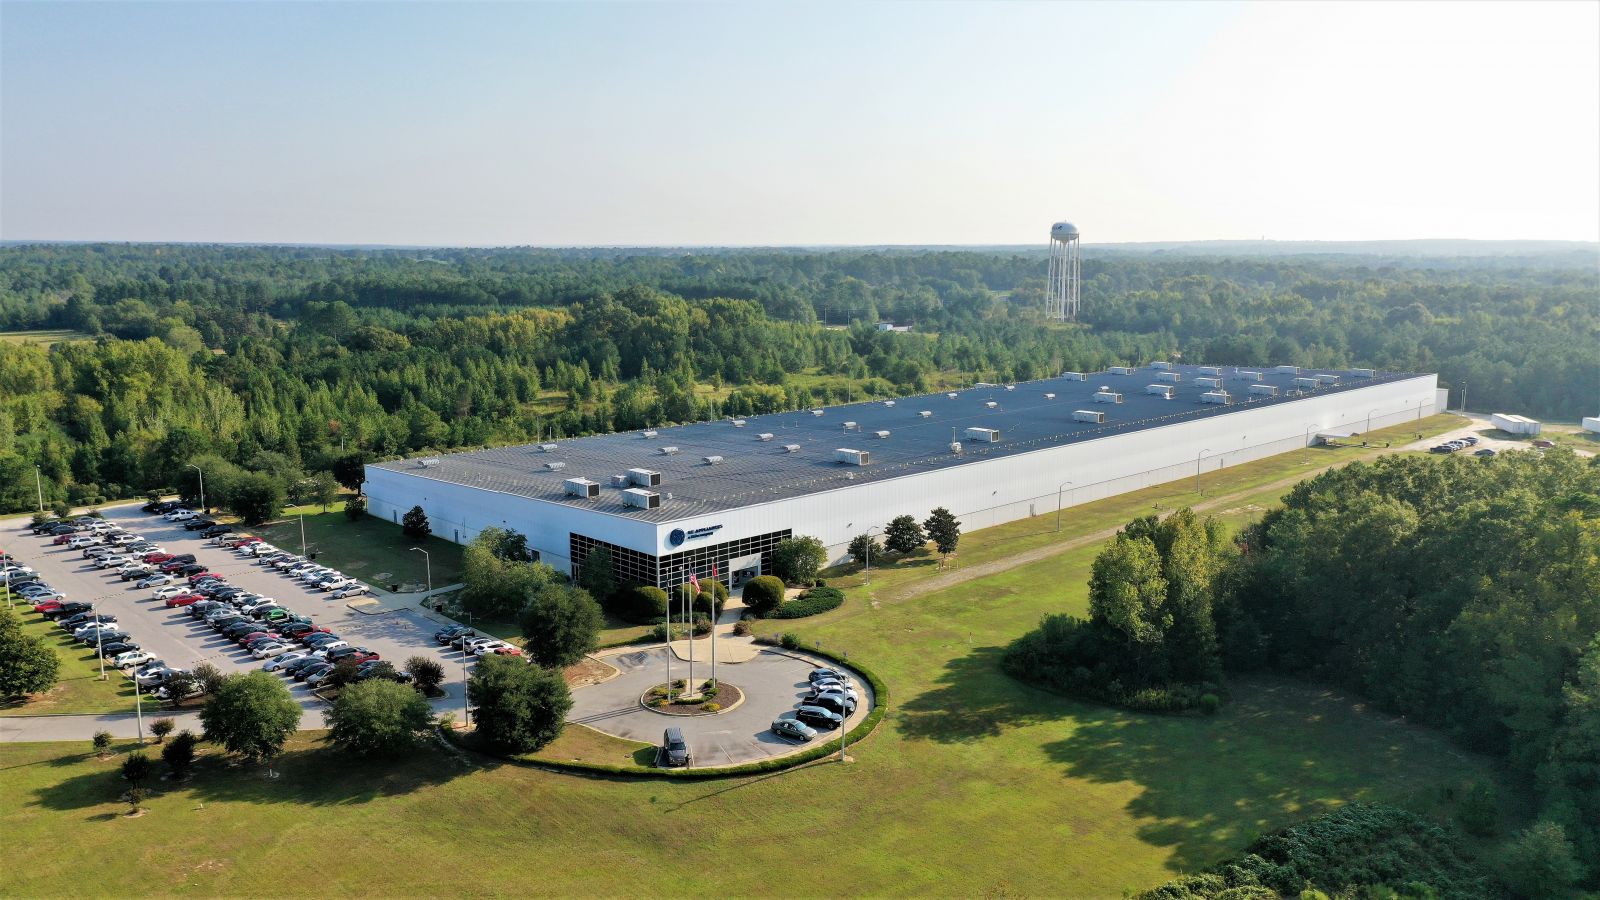 GE Appliances is investing $60 million to remodel its Camden plant, which currently makes refrigerators, into a water heater manufacturing facility. (Photo/Provided)